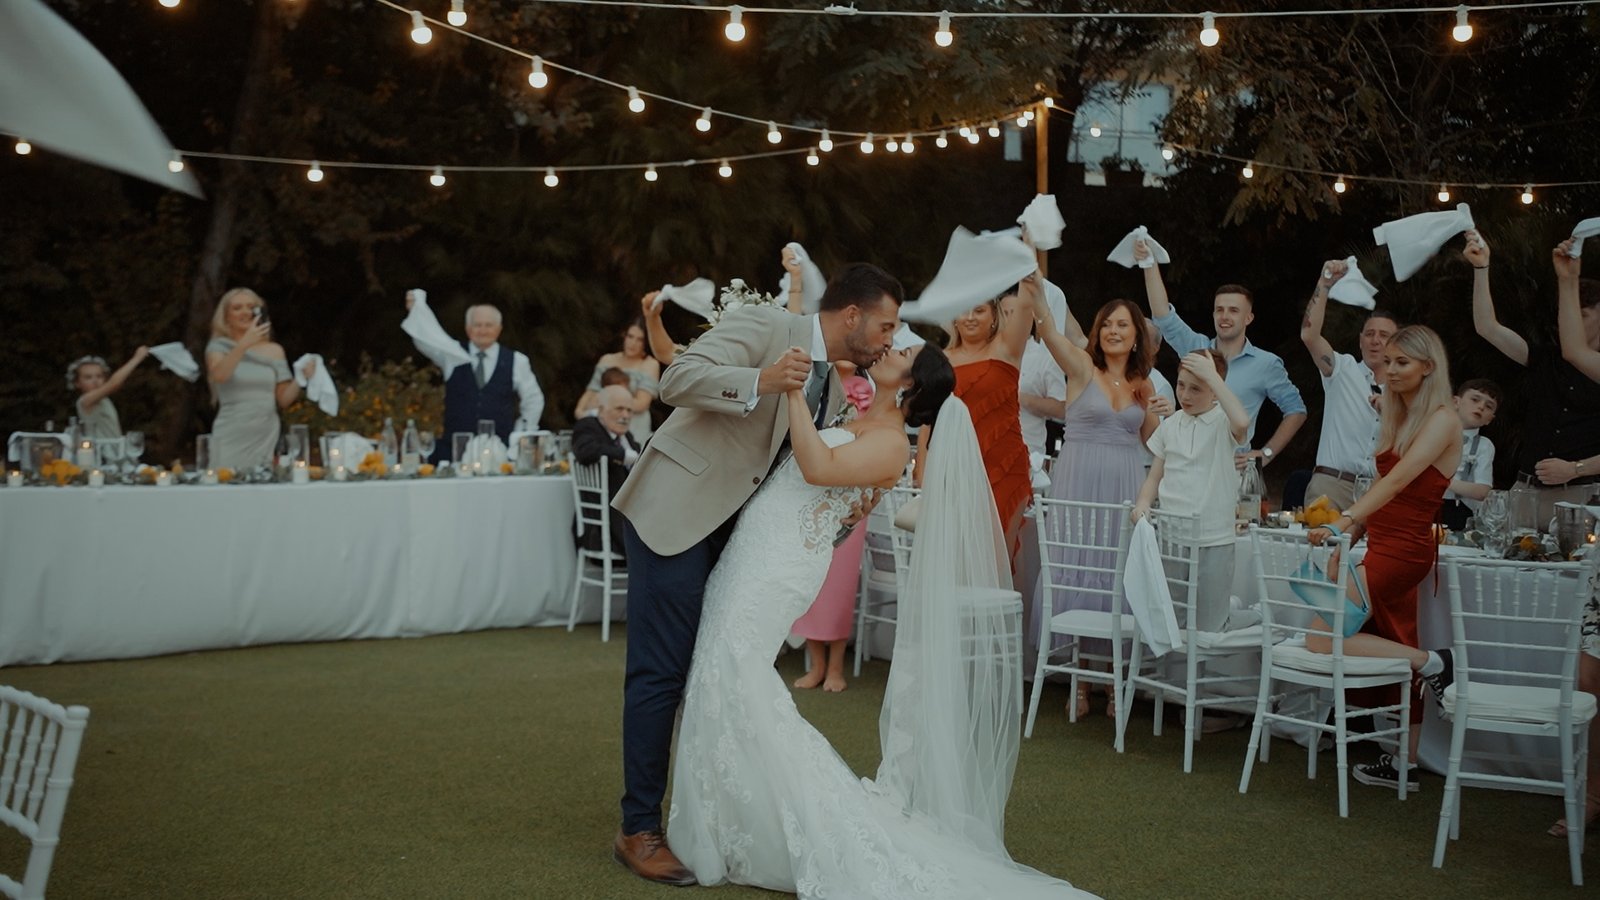 Trends and Suggestions for Wedding Films